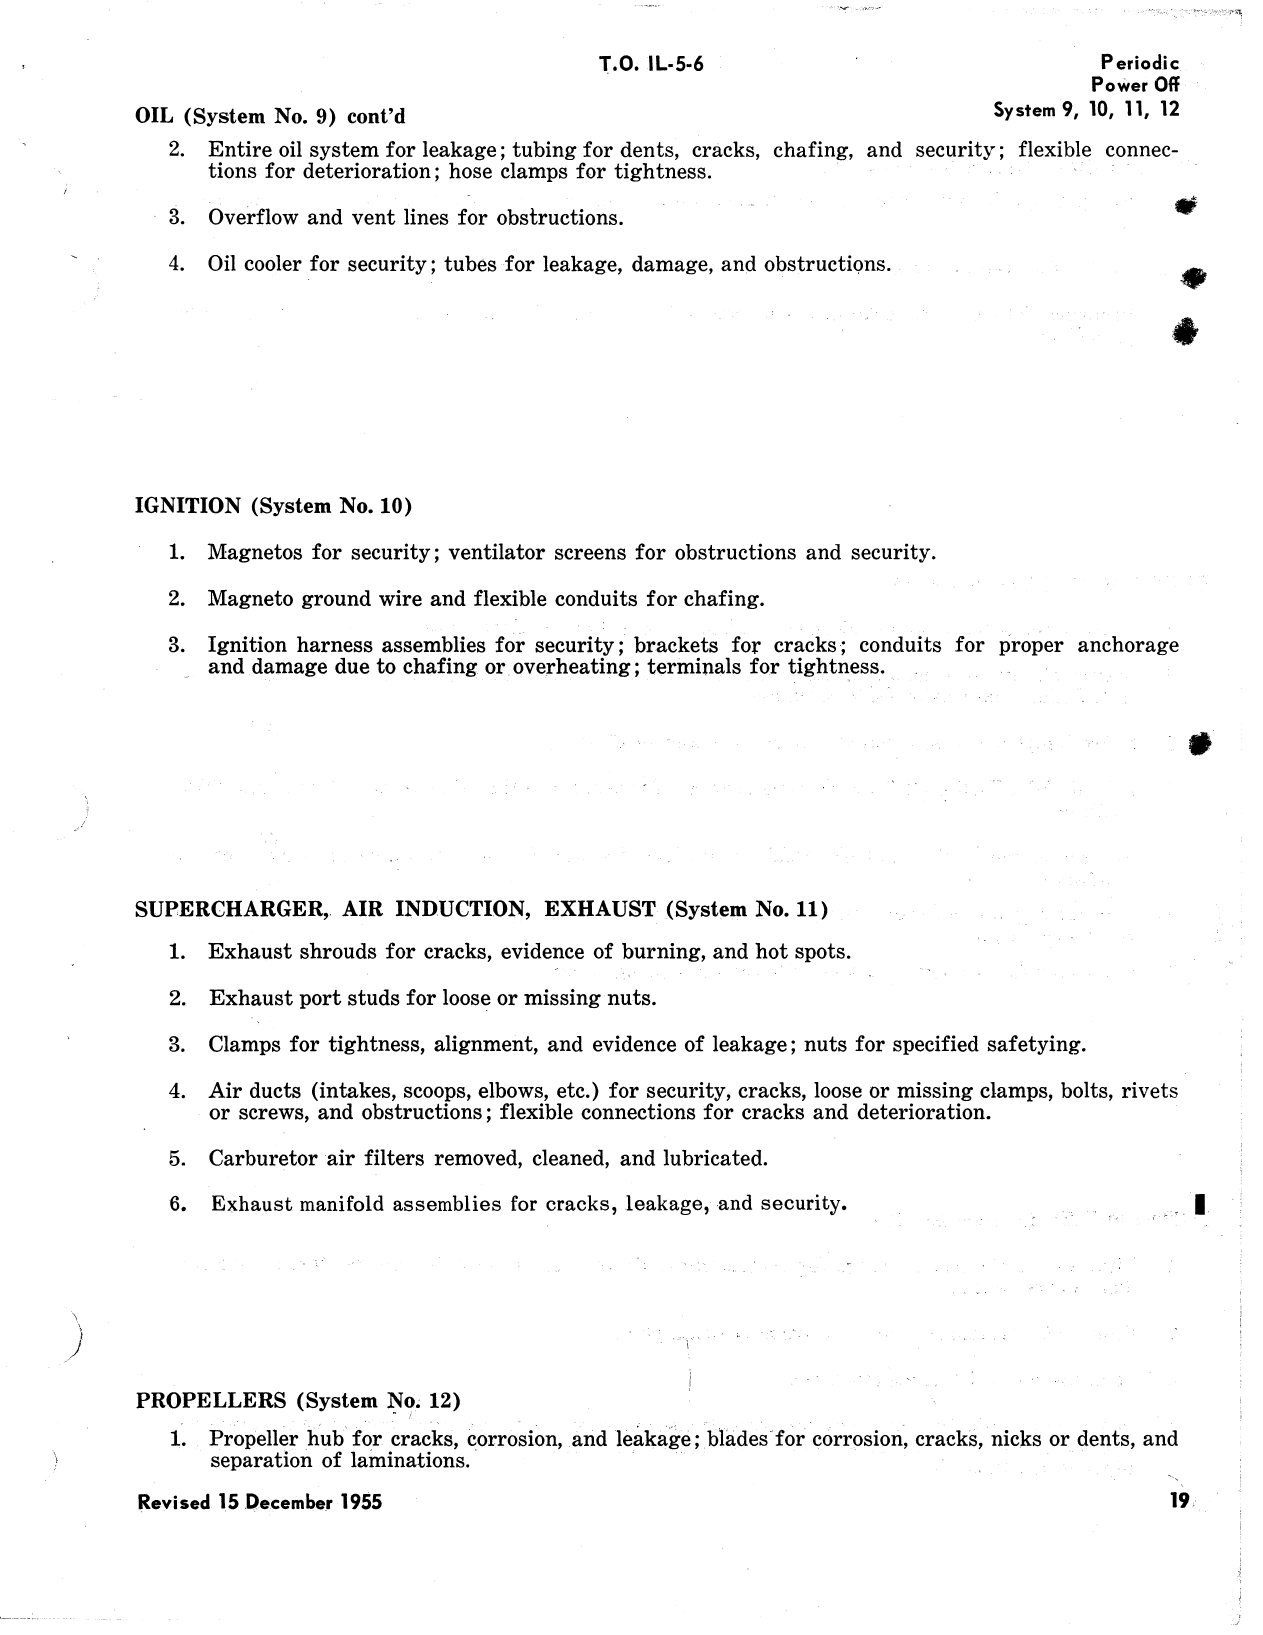 Sample page 22 from AirCorps Library document: Inspection Requirements - L-5, OY-1, OY-2